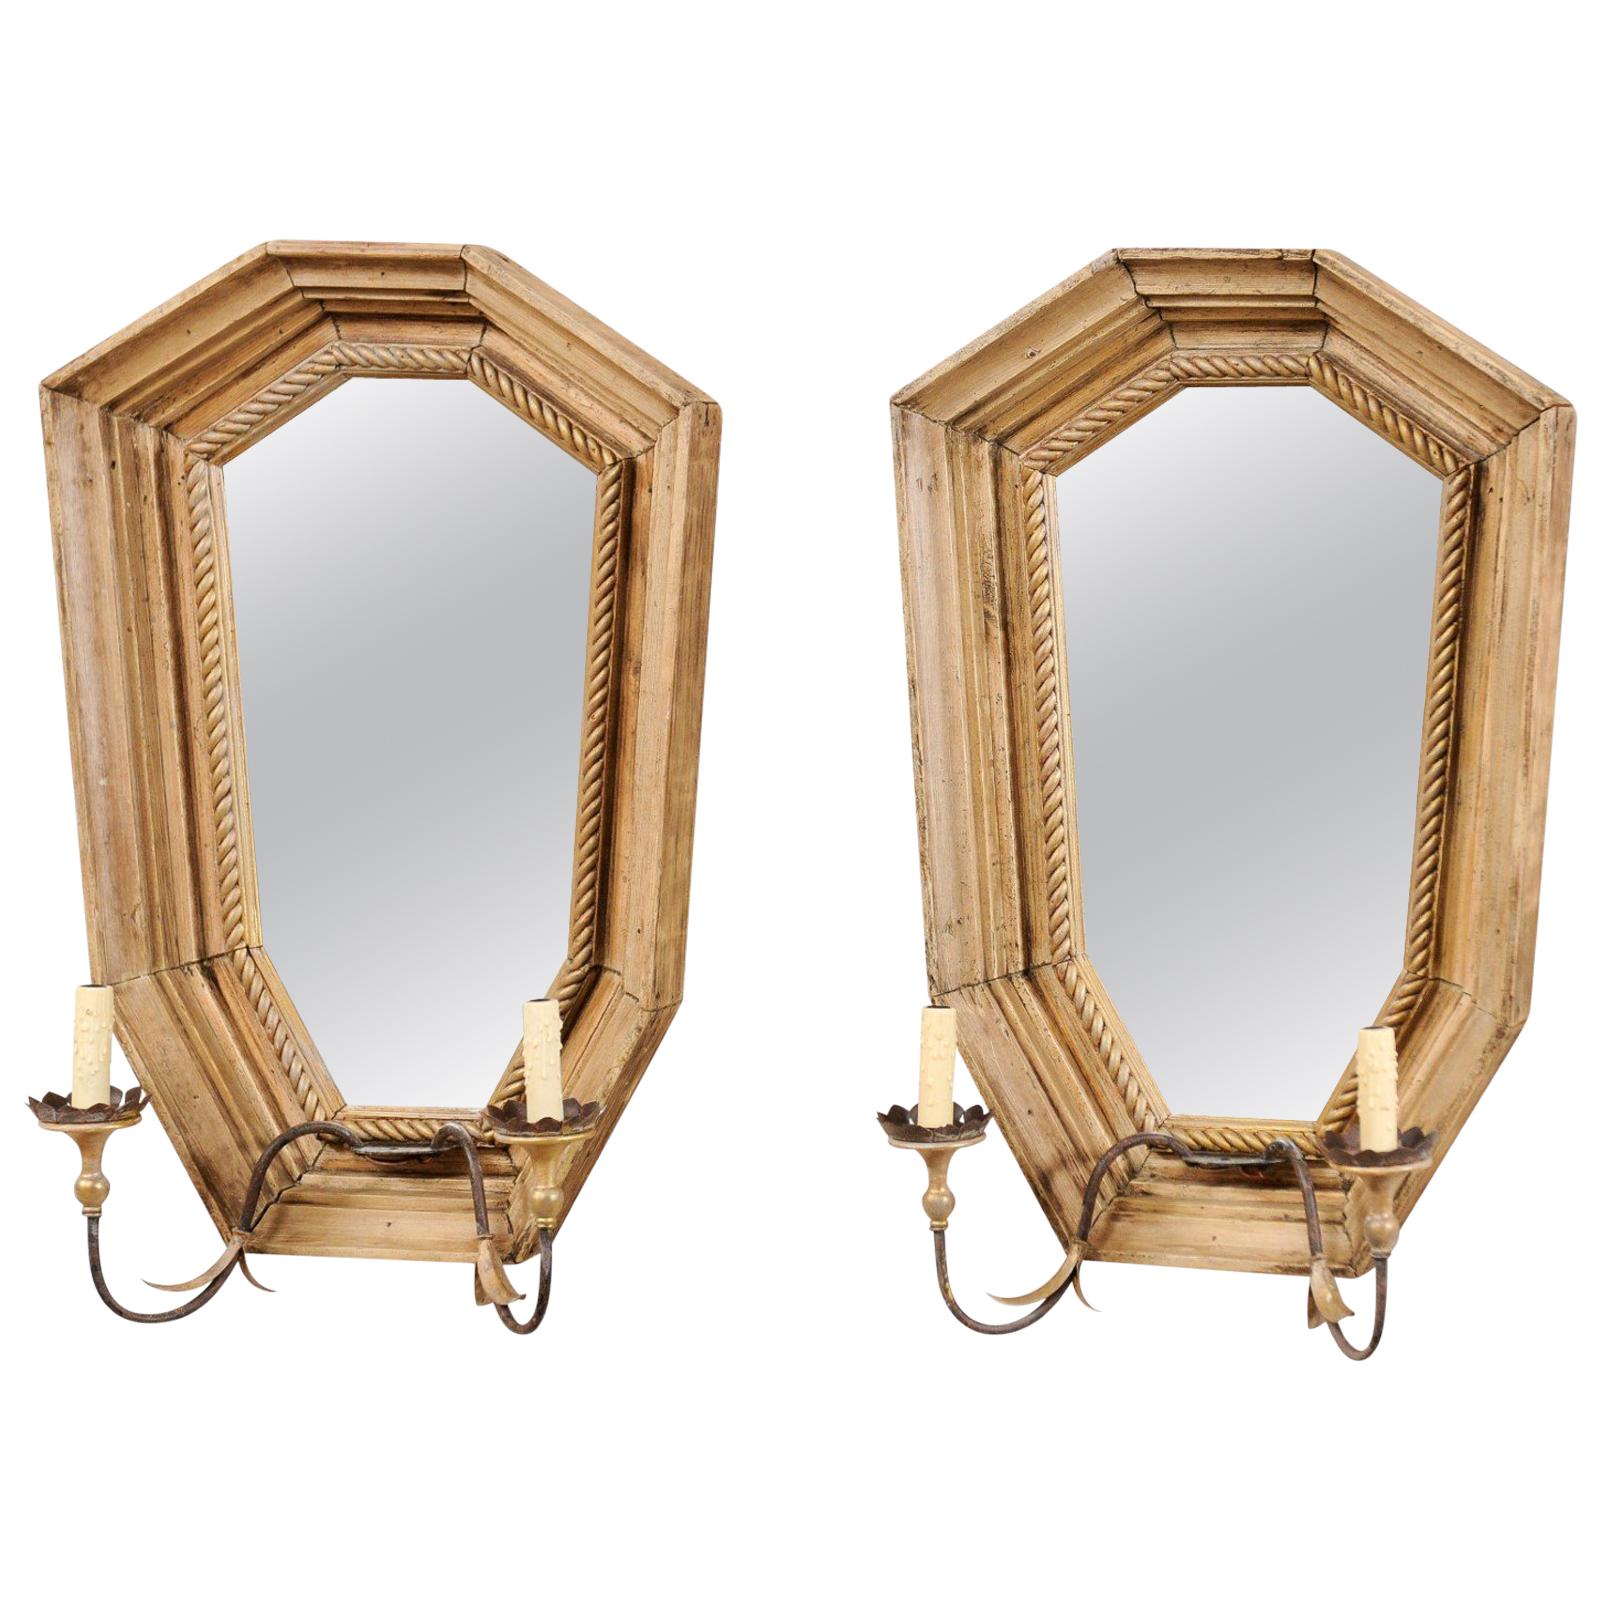 Italian Mid-20th Century Sconces with Large Mirrored Back-Plate